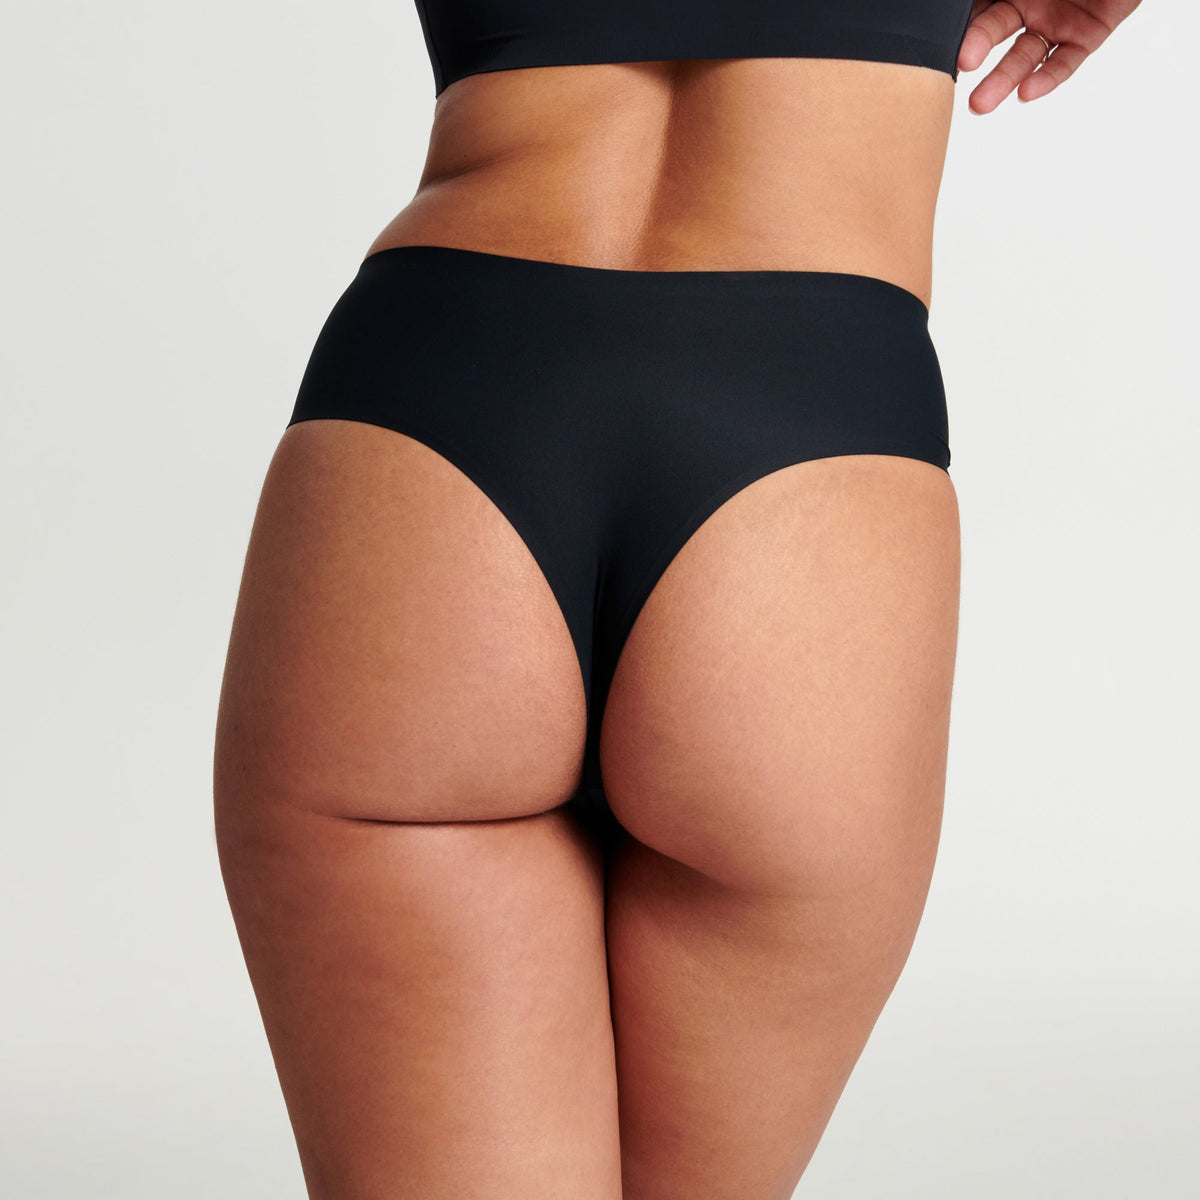 Yunleeb High Waisted Thong No Show Underwear for Women,Seamless High Rise  Panties 4 Pack Mix3 L 